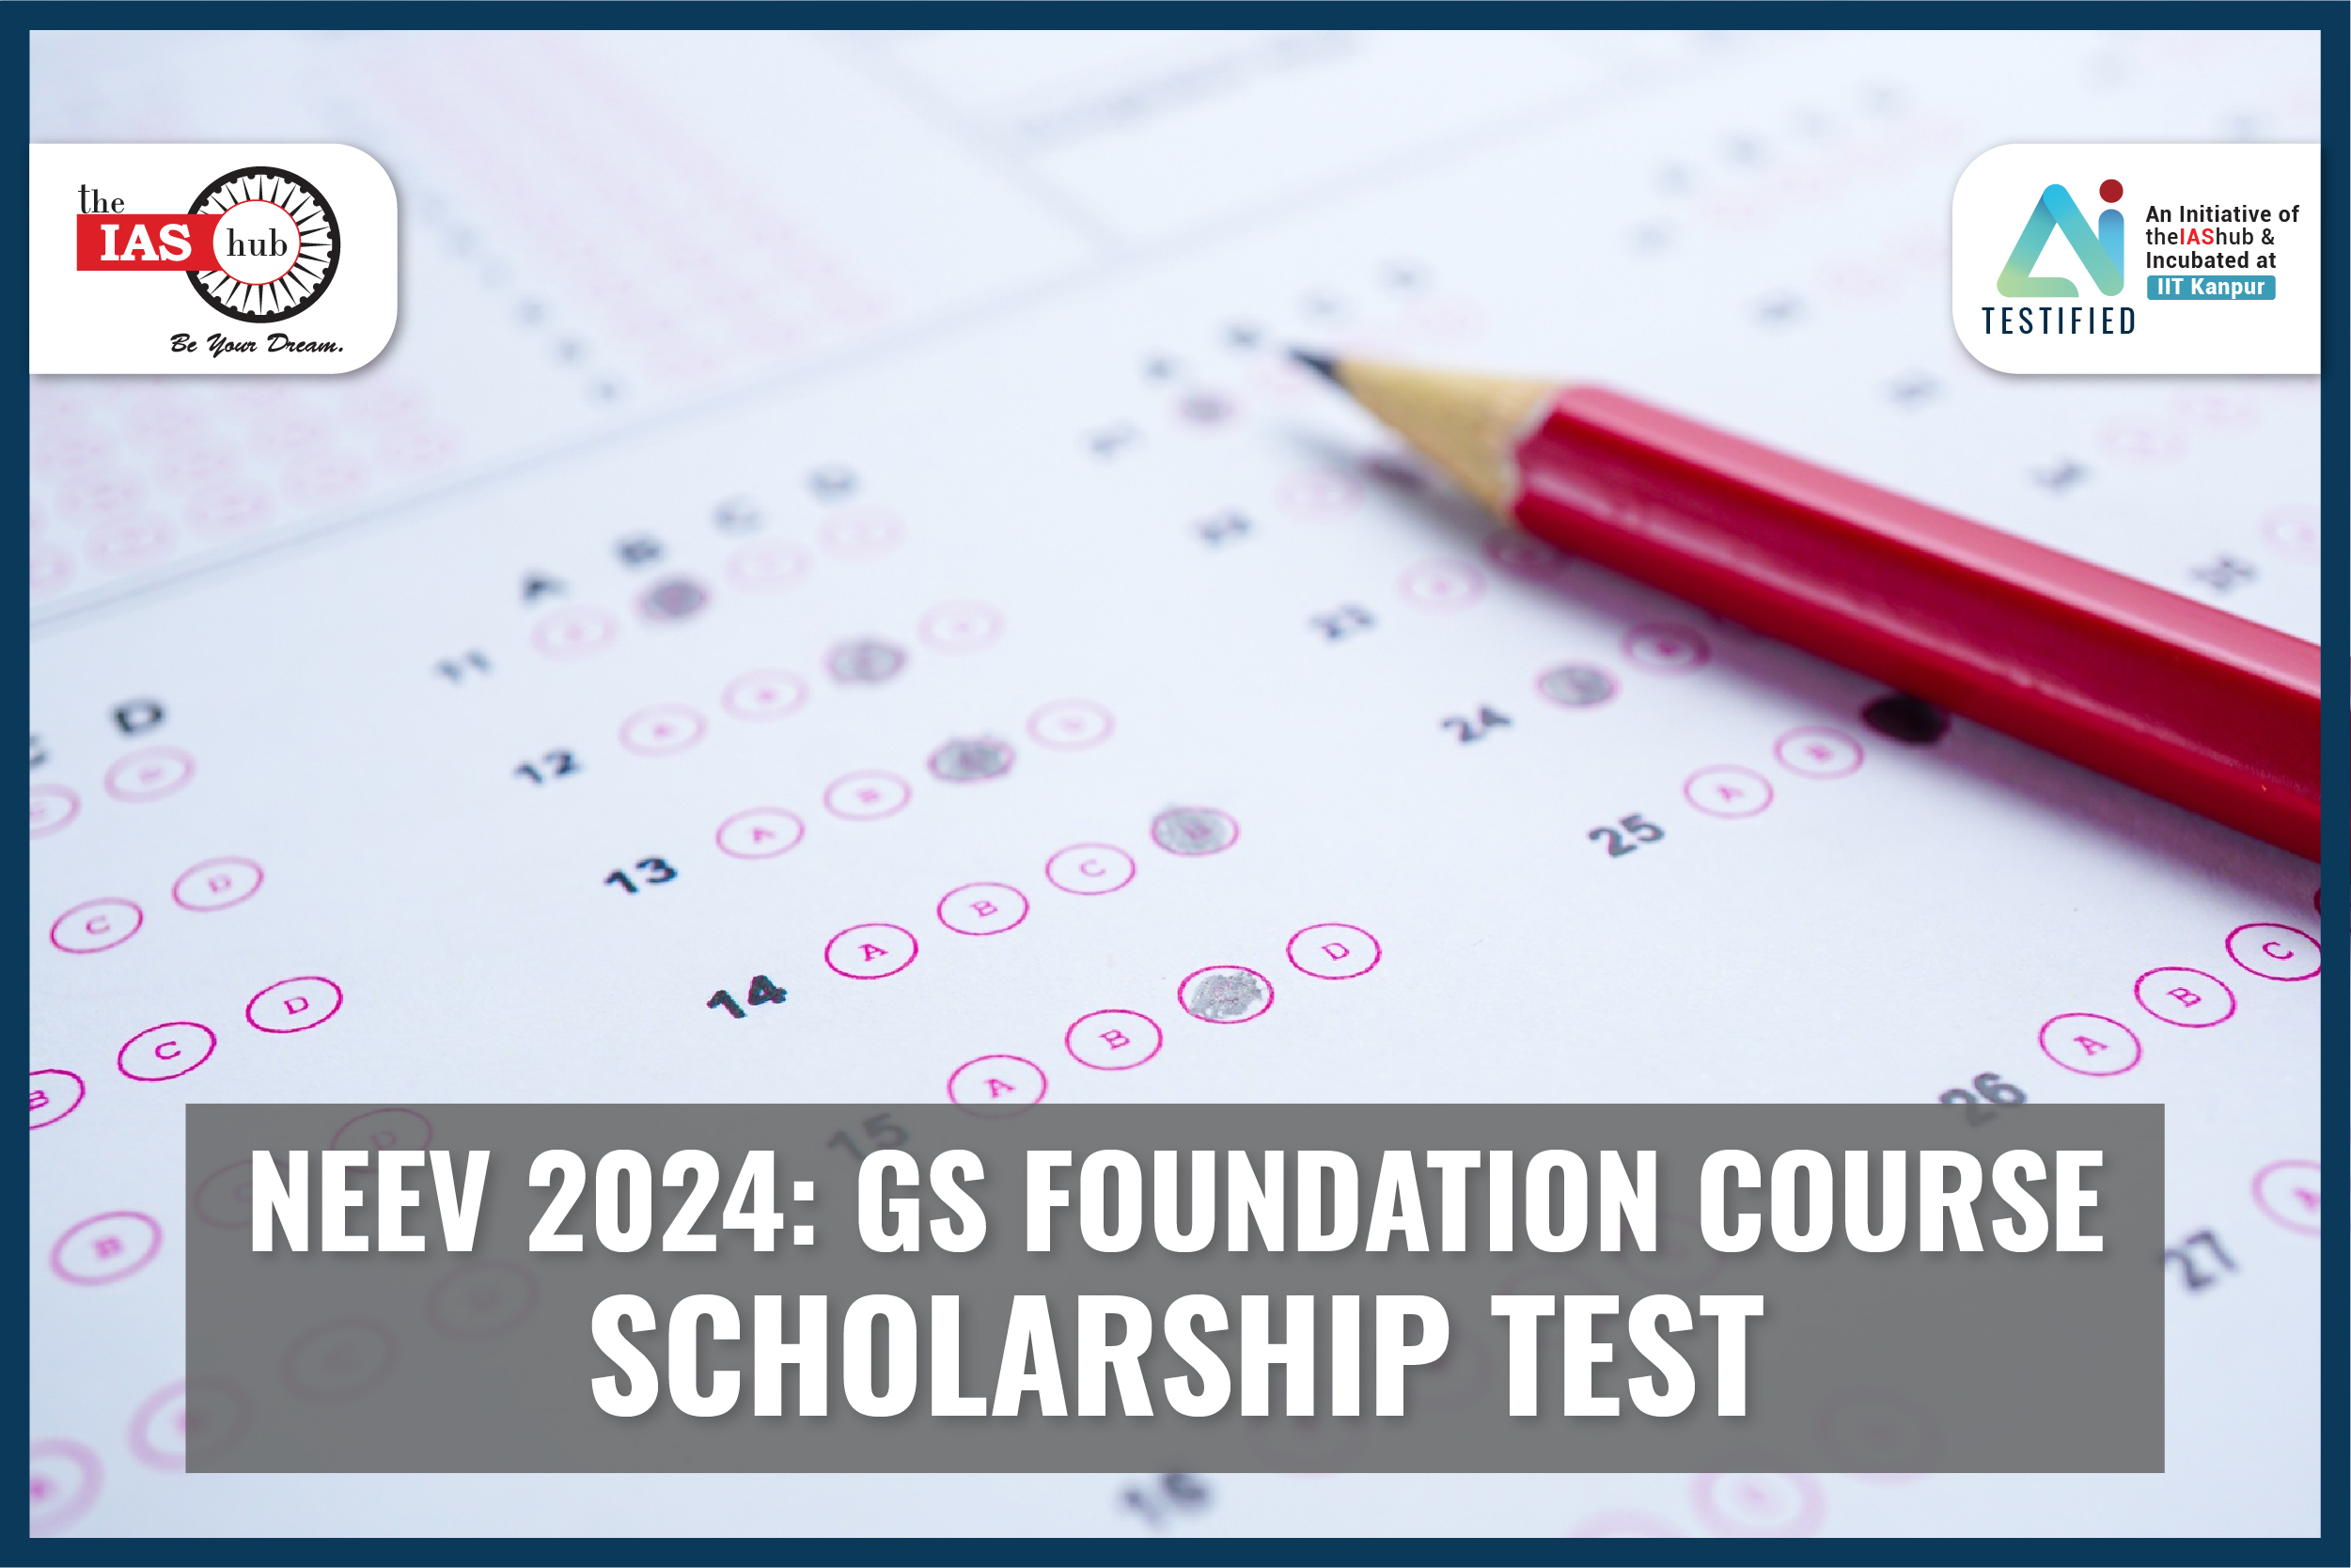 NEEV 2024: GS Foundation Course Scholarship Test